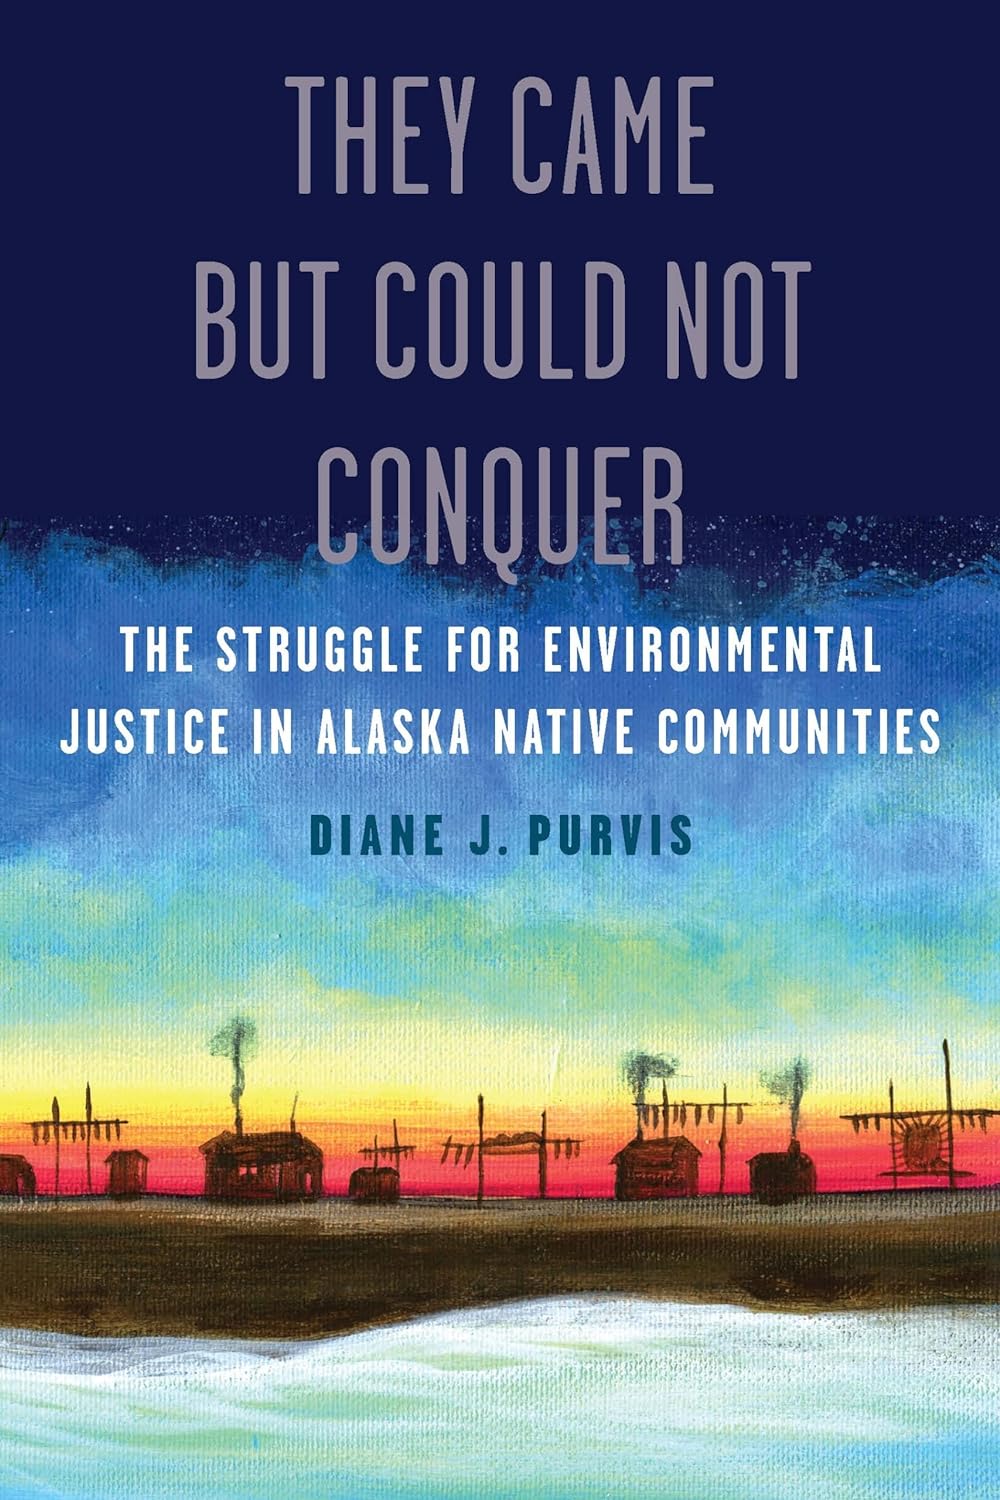  They Came But Could Not Conquer: The Struggle for Environmental Justice in Alaska Native Communities by Diane J. Purvis